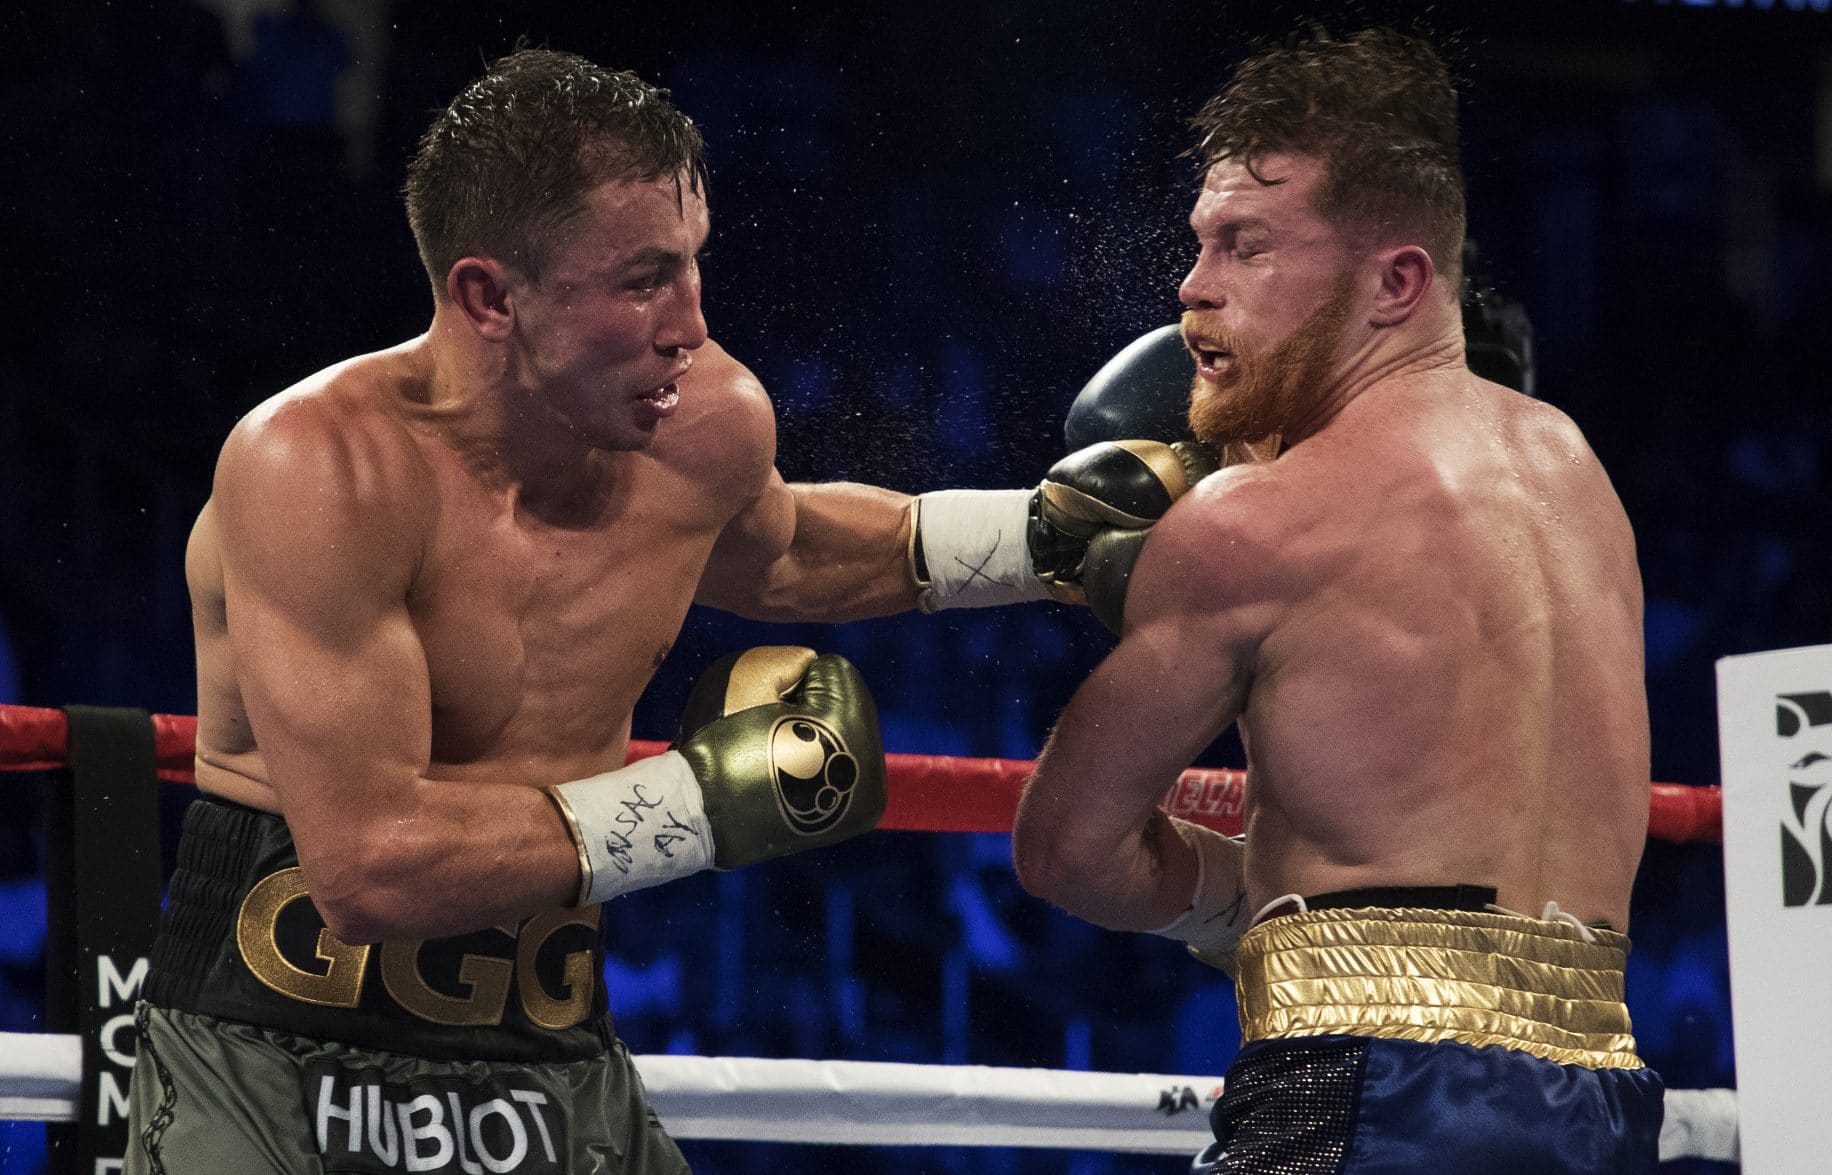 Top 10 Boxers Pound For Pound: Does Gennady Golovkin Top the List? 2